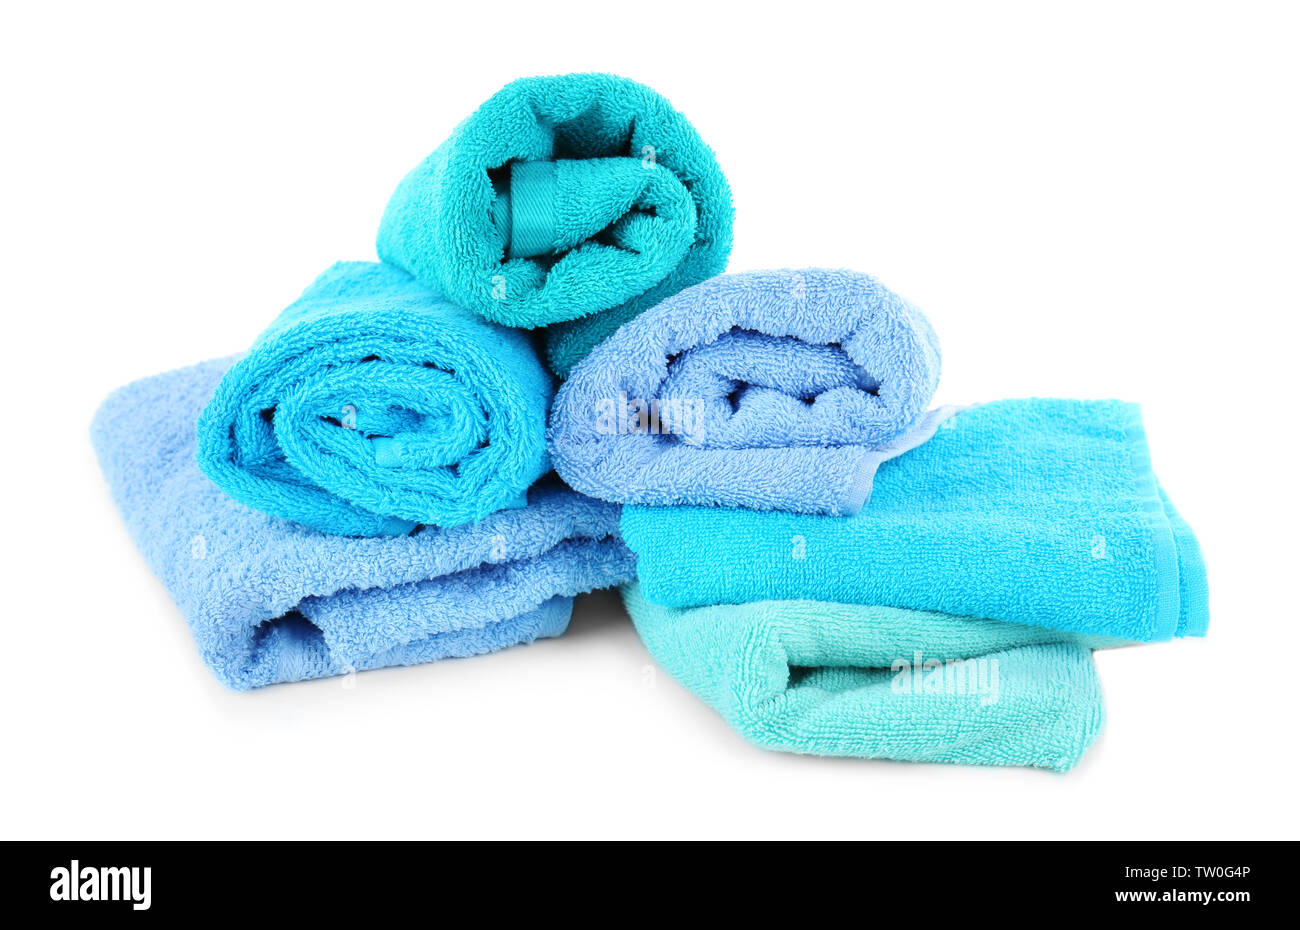 Pile of towels isolated on white Stock Photo